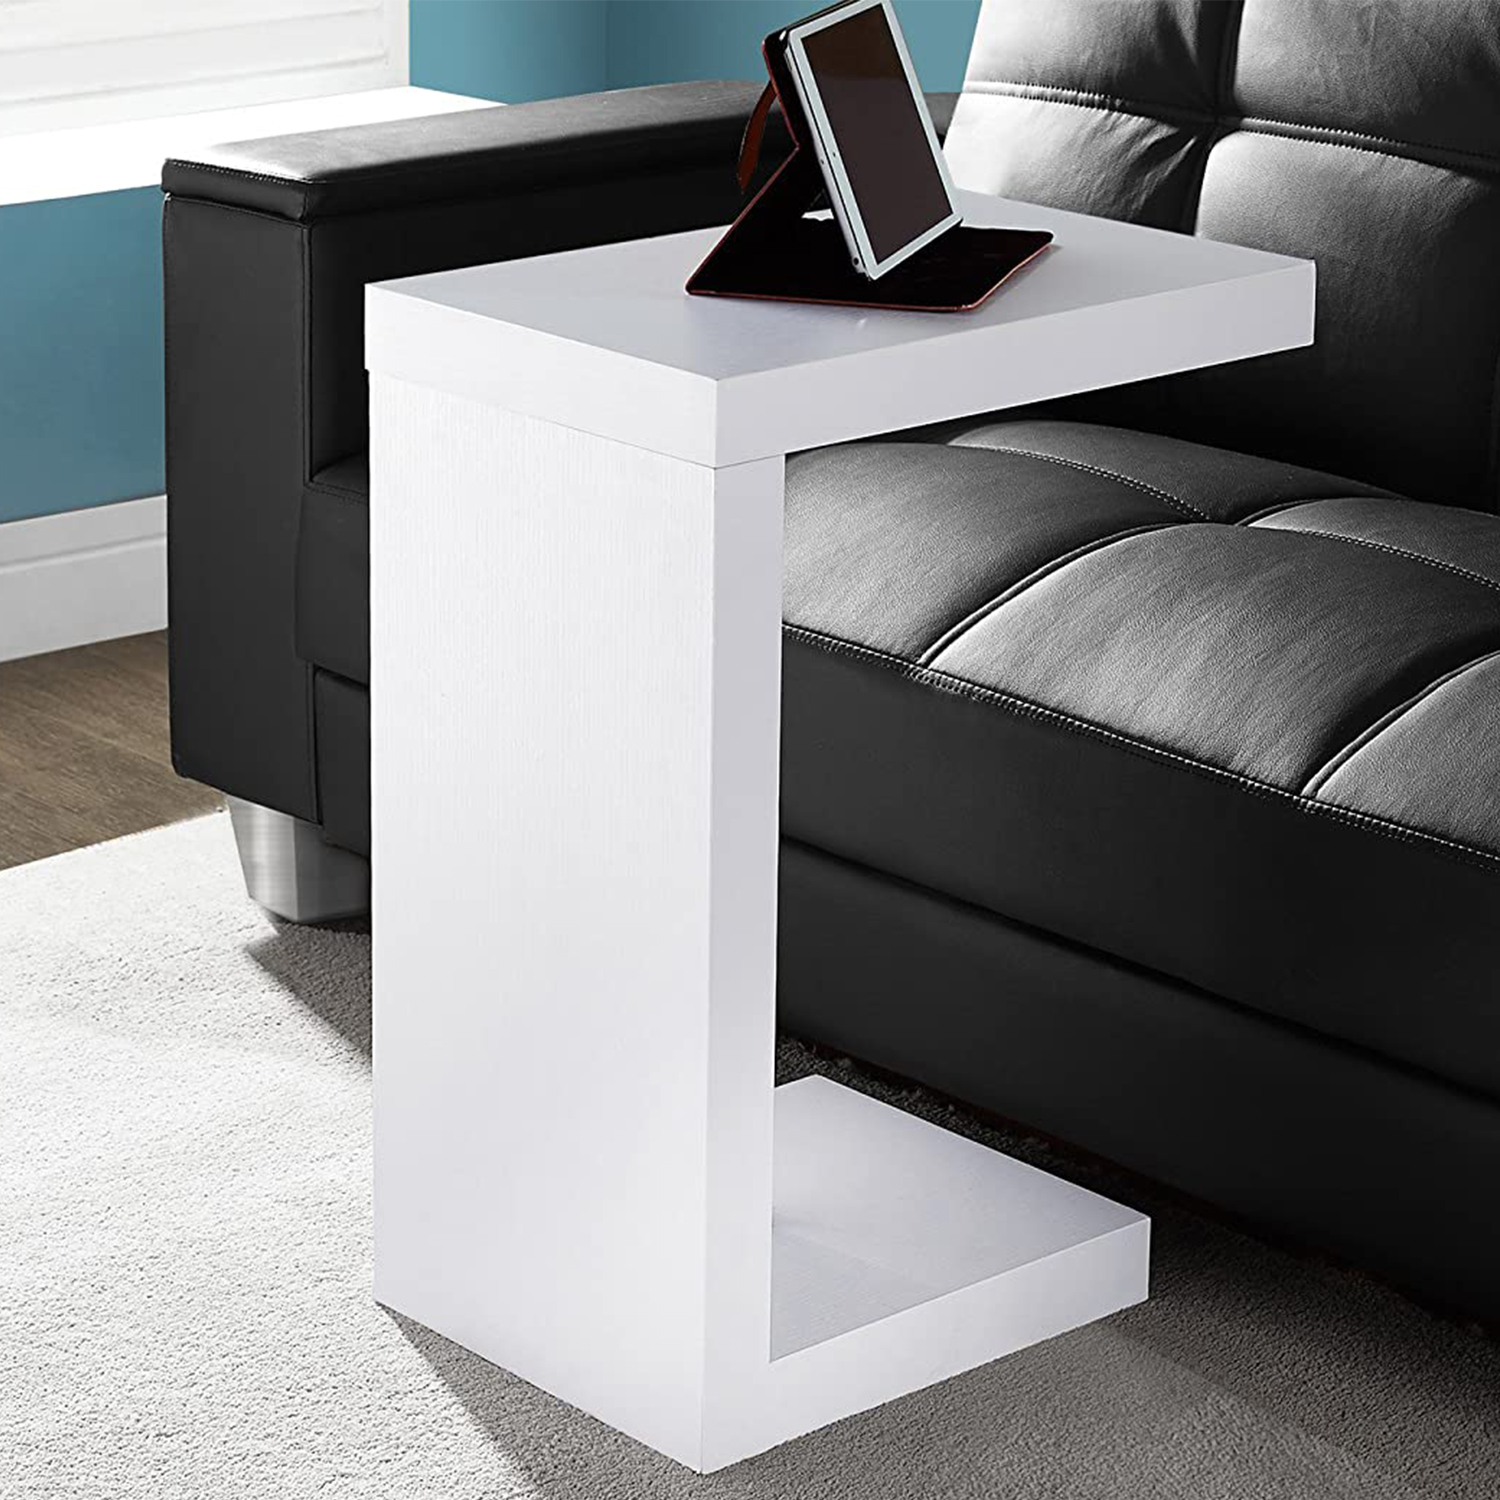 11.5" x 18" x 24" White Hollow Core Particle Board Accent Table